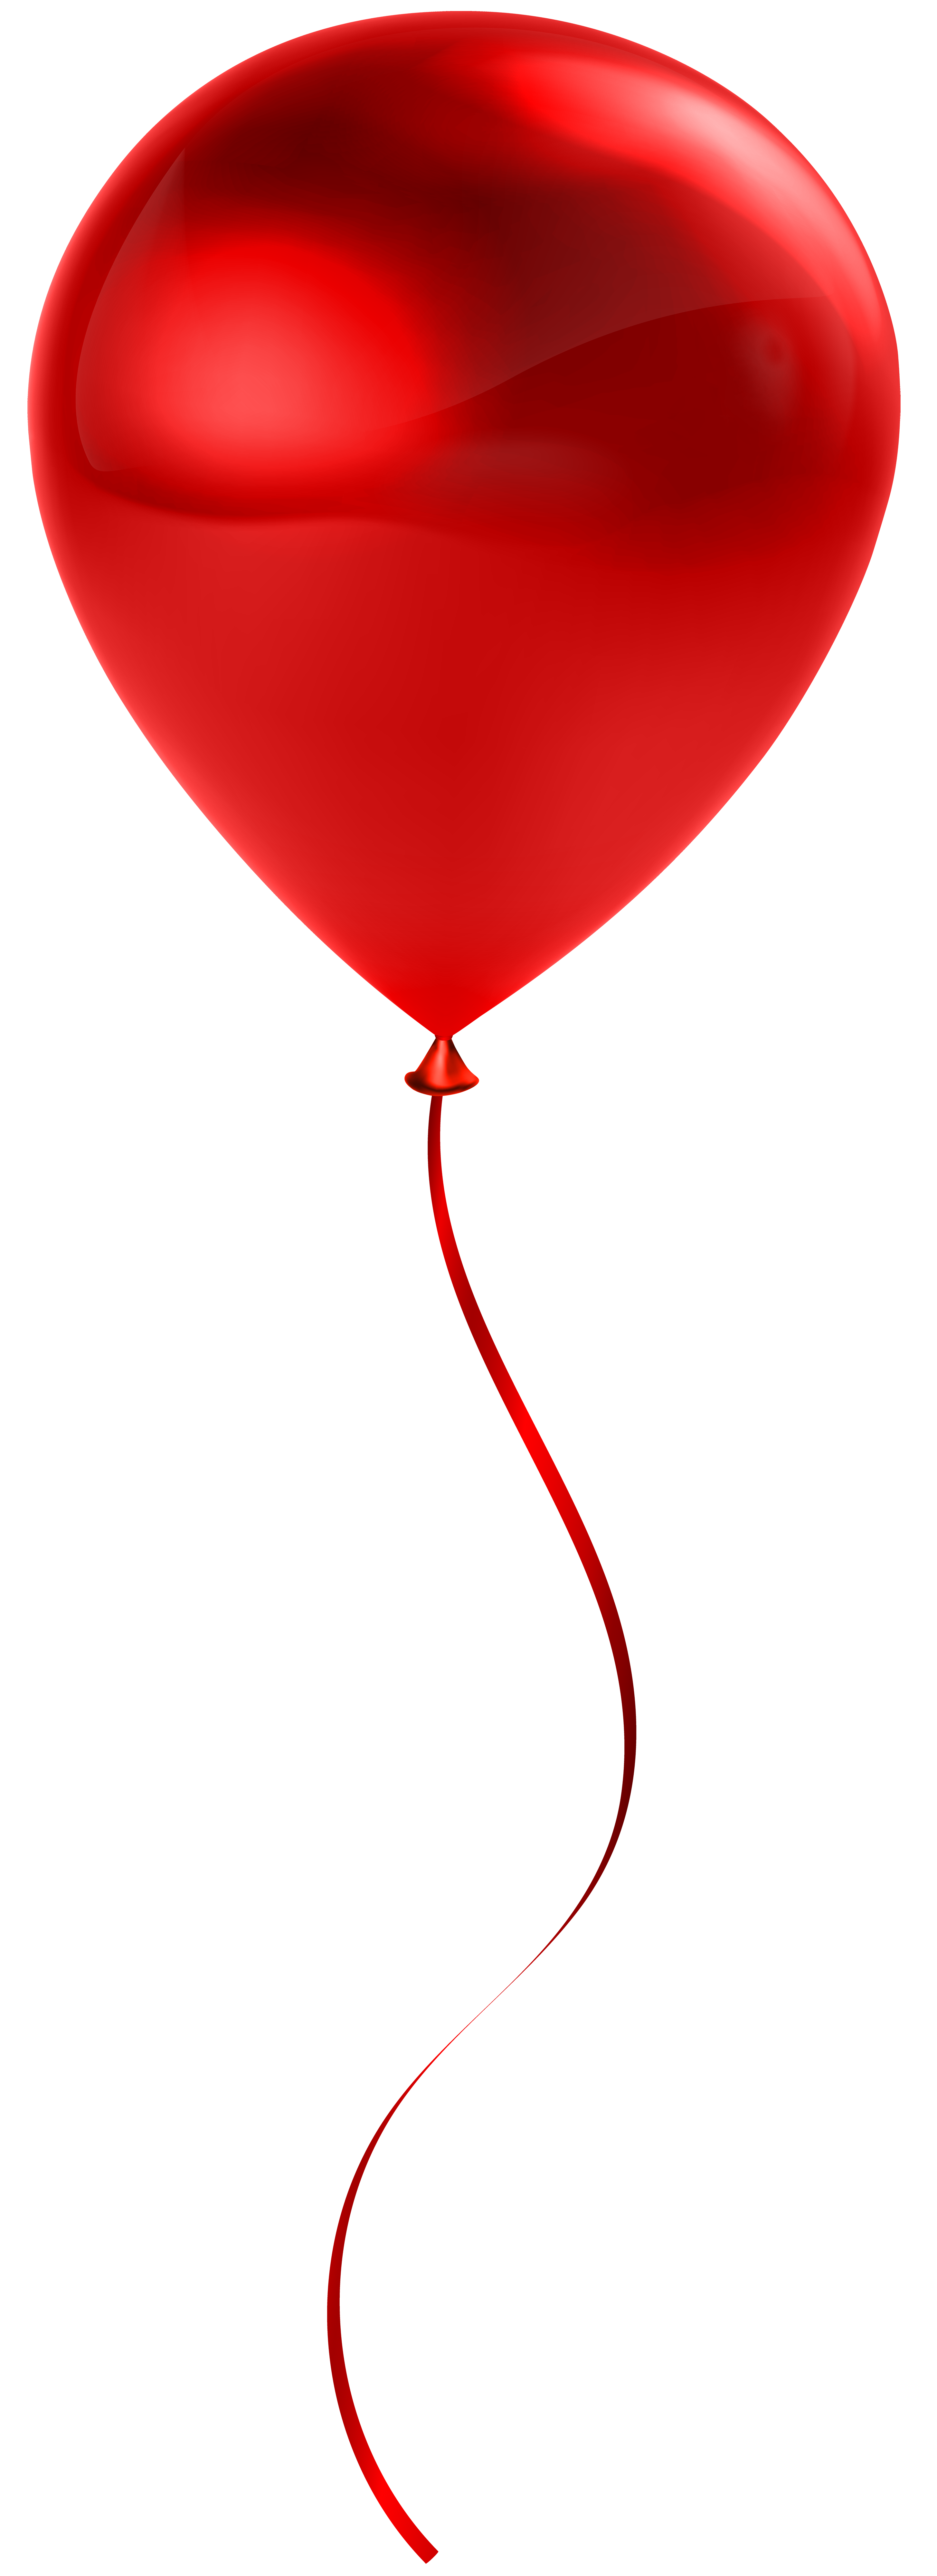 Single Red Balloon Transparent Clip Art | Gallery Yopriceville - High ...